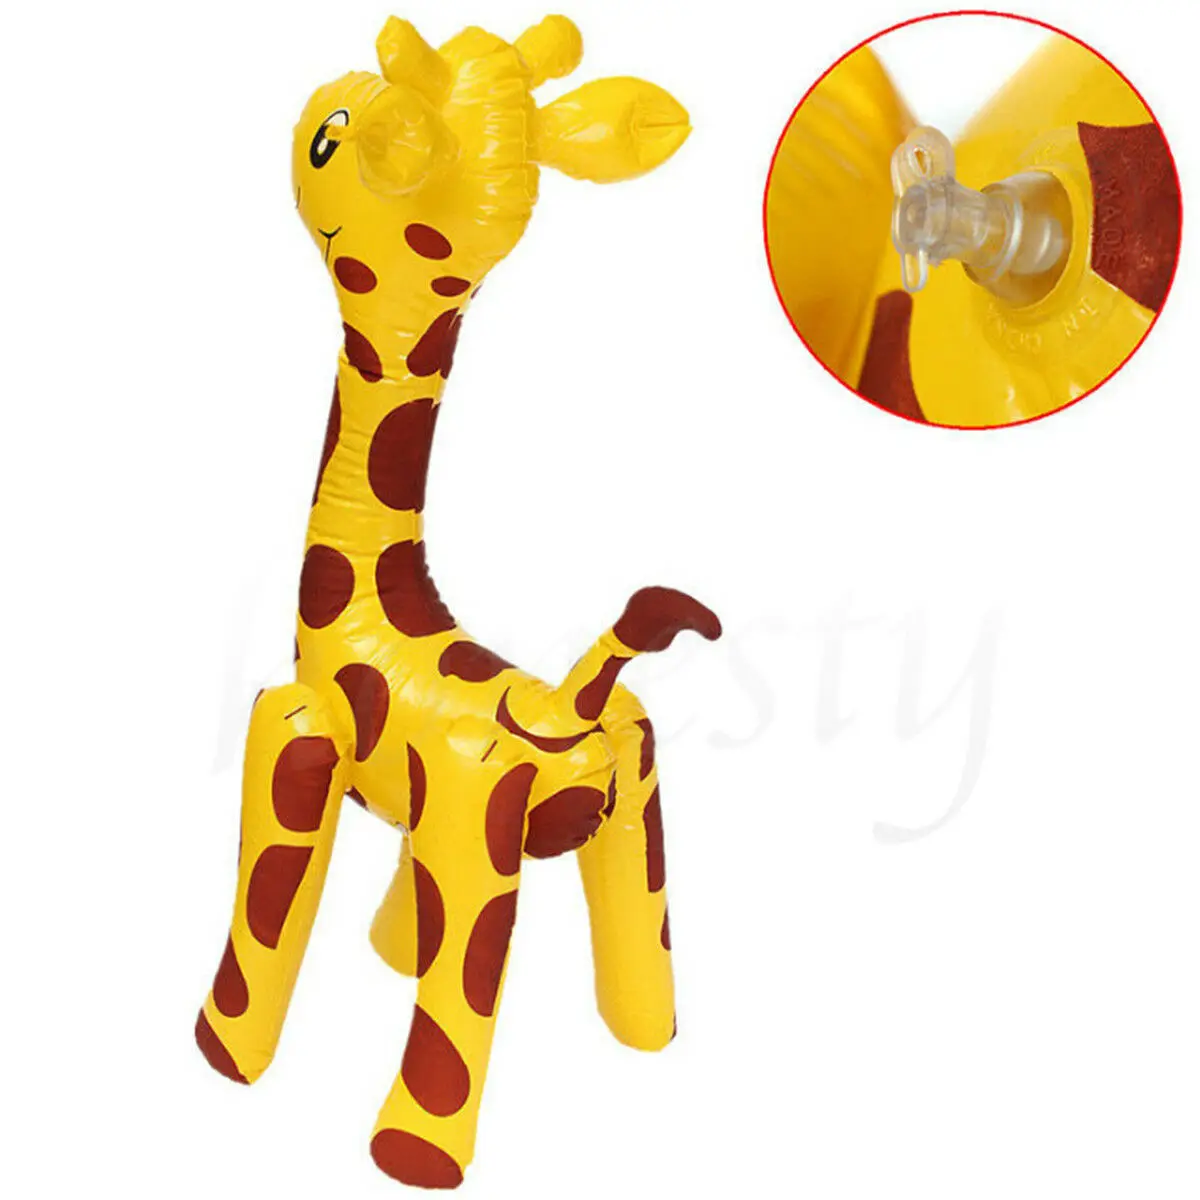 Large 60cm Inflatable Giraffe Zoo Animal Blow Up Kids Toy Pool Party Decor Gift 